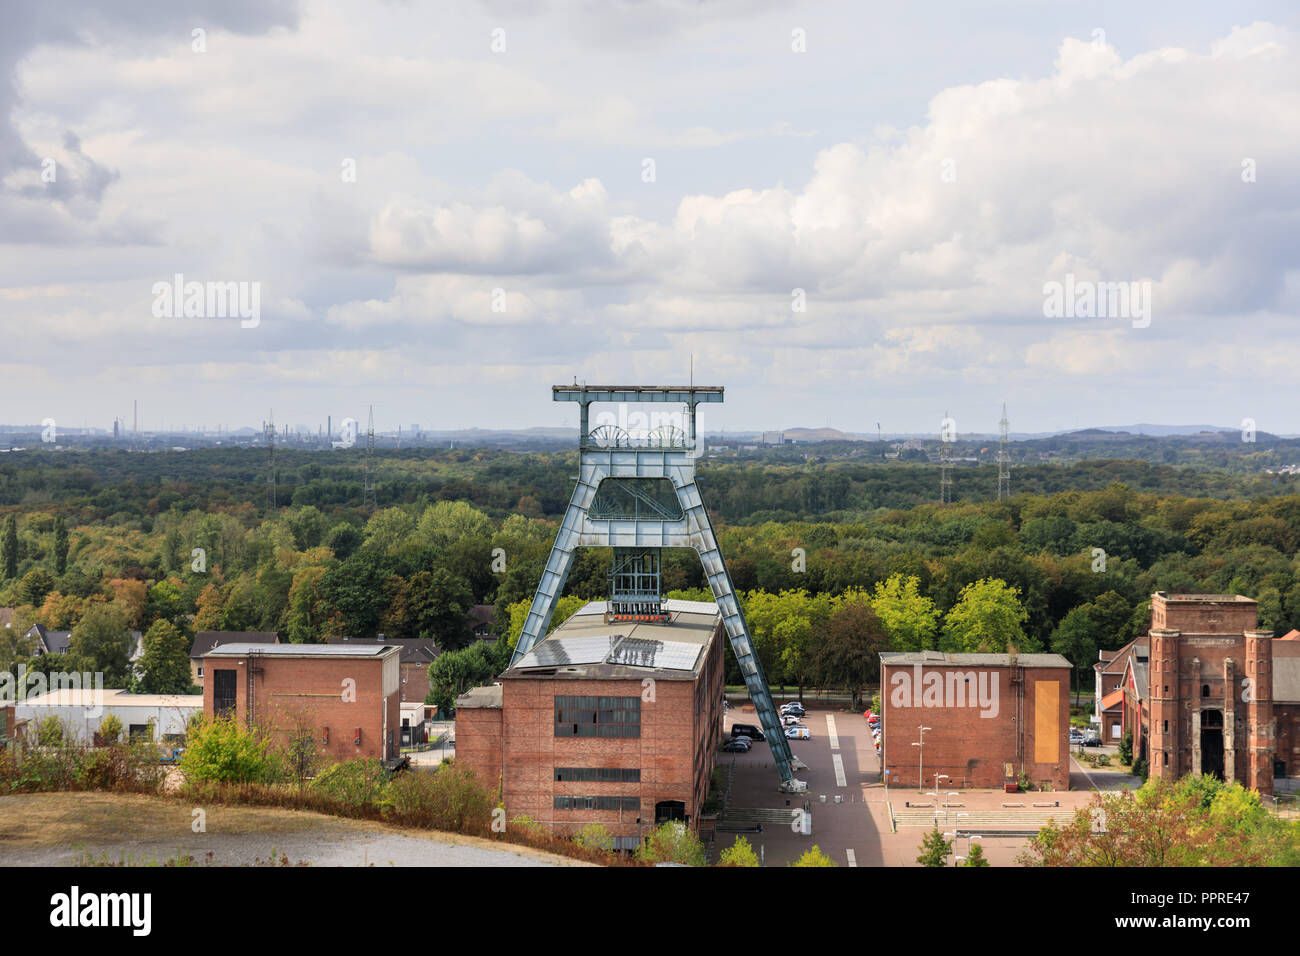 Zeche Ewald panoramic view from above, industrial buildings and the former coal mine shaft tower, Herten, Ruhrgebiet, Germany Stock Photo